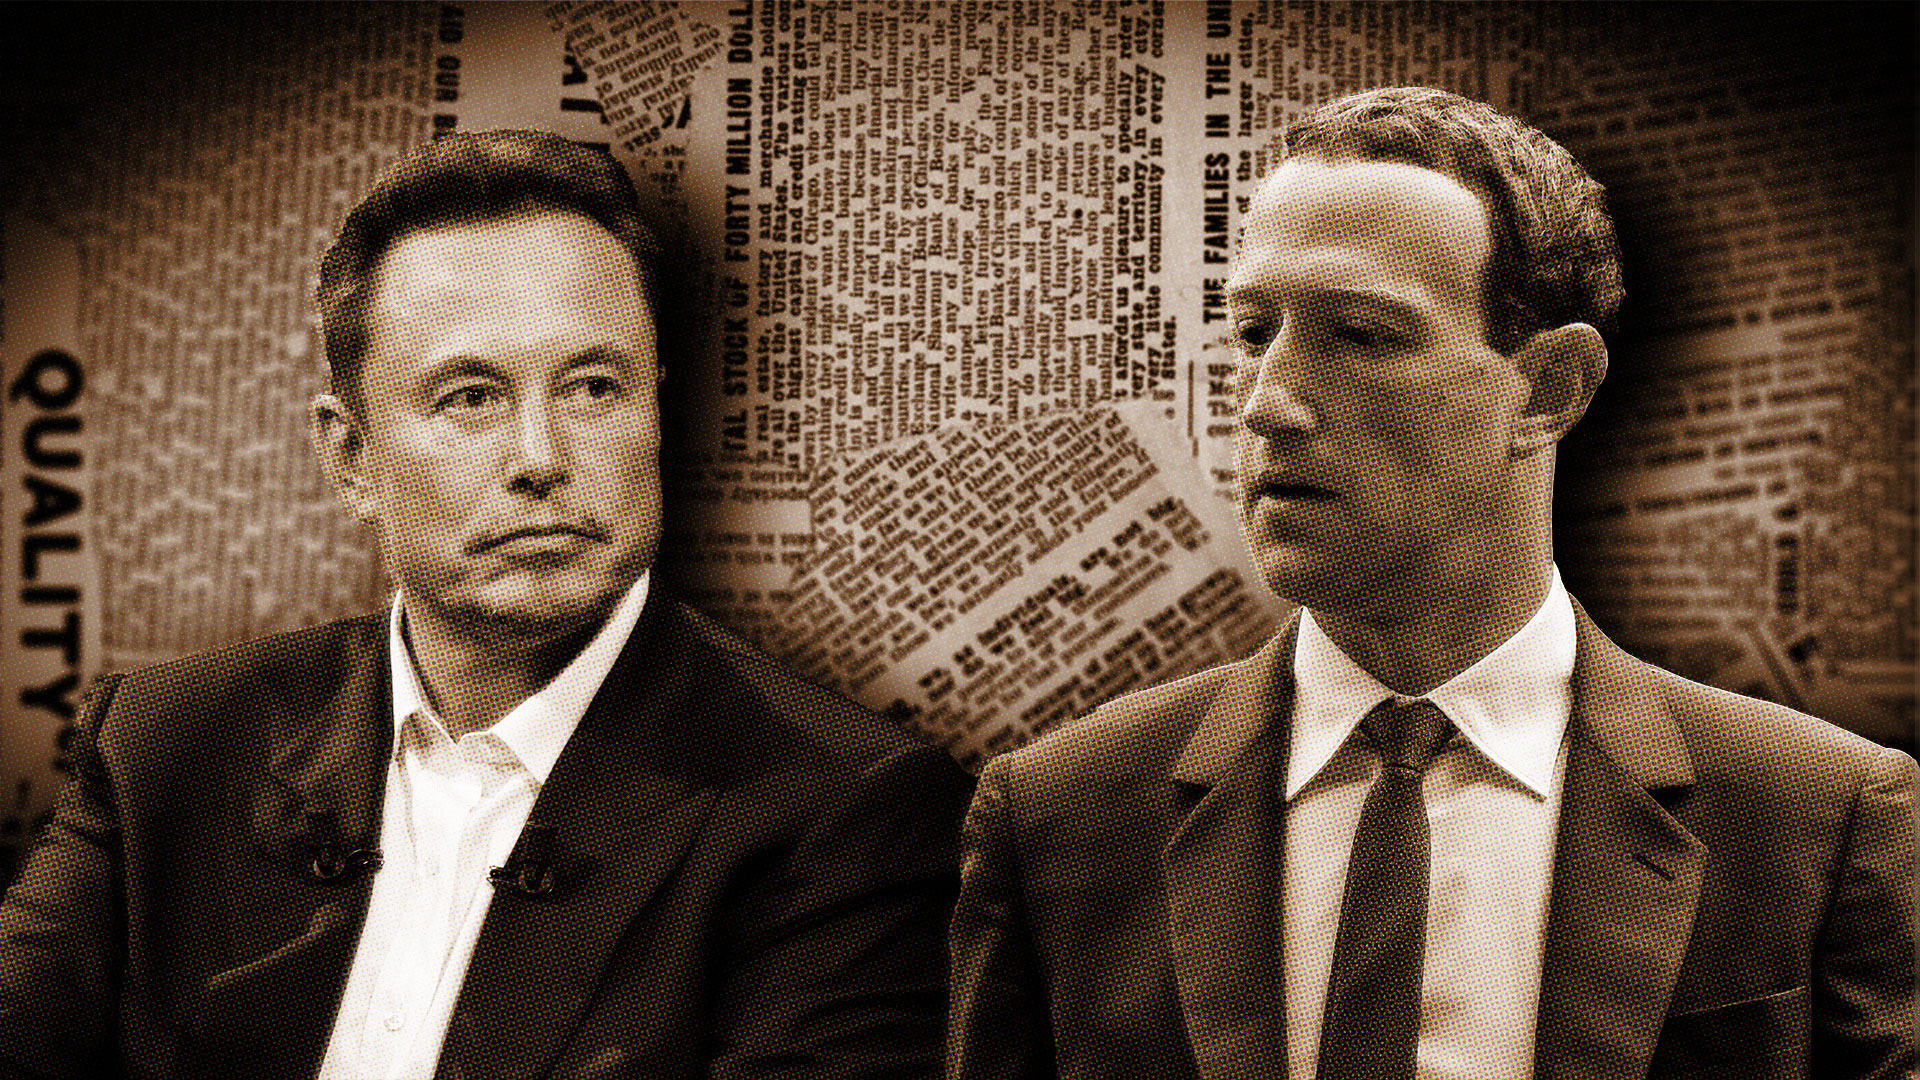 The bad blood between Musk and Zuckerberg began with a bang